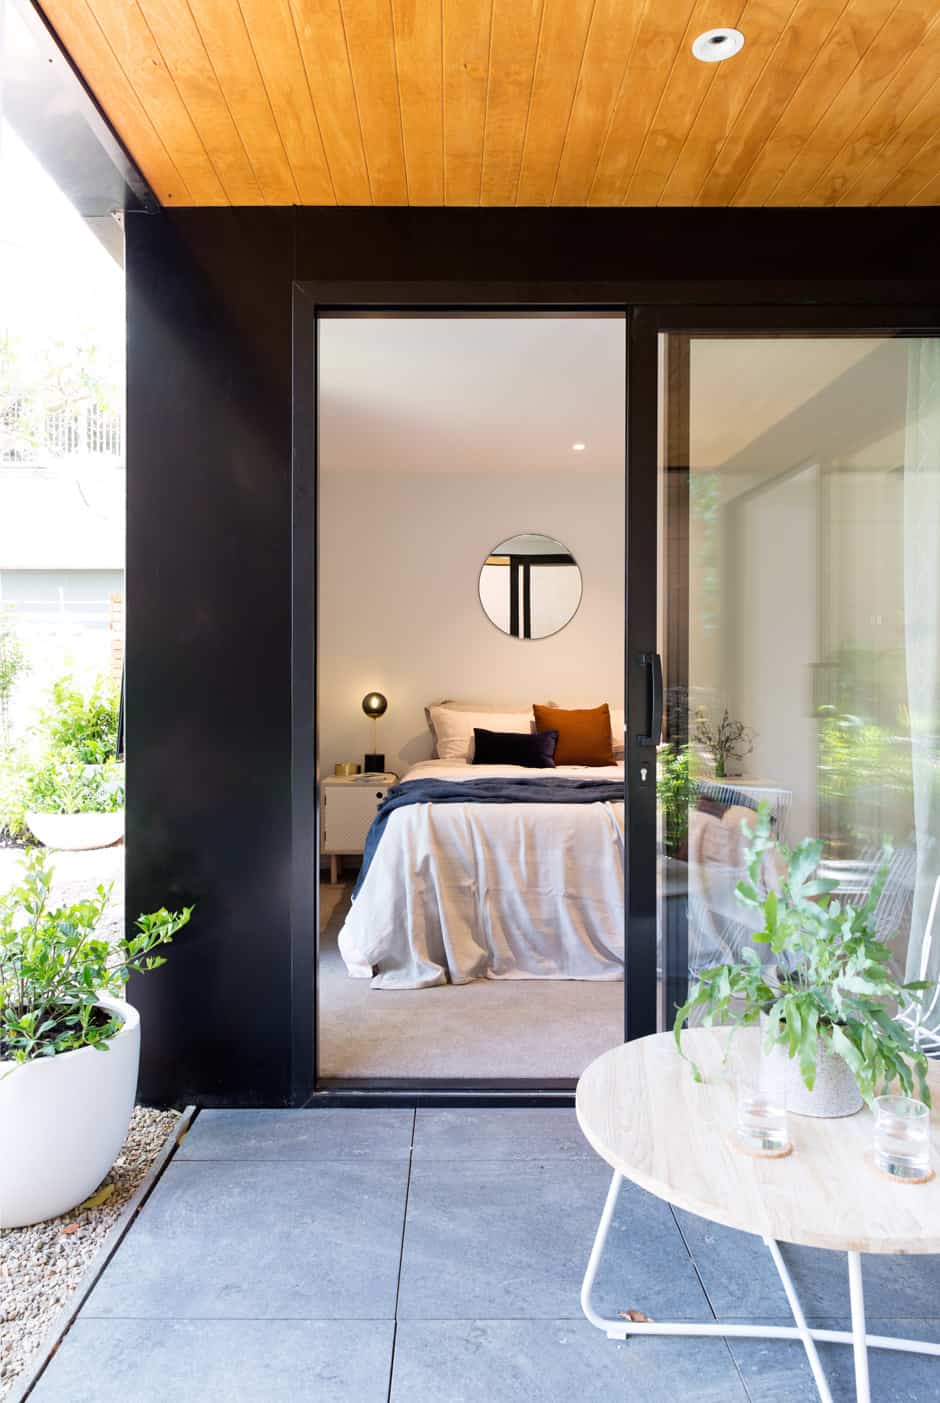 FAR LEFT In the guest bedroom, Botanical Garden by Billie Culy is reflected in a Circular mirror by Mark Antonia. On the bedside table by Homebase Collections is a Line table lamp by Douglas and Bec. LEFT The bathroom vanities echo the kitchen cabinetry. BELOW Glinks Gully by Duncan Innes features in the master bedroom, where a Monmouth Glass Studio pendant is suspended over a Douglas and Bec bedside table. OPPOSITE The guest room connects to the courtyard and would work equally well as a second living area or study. 